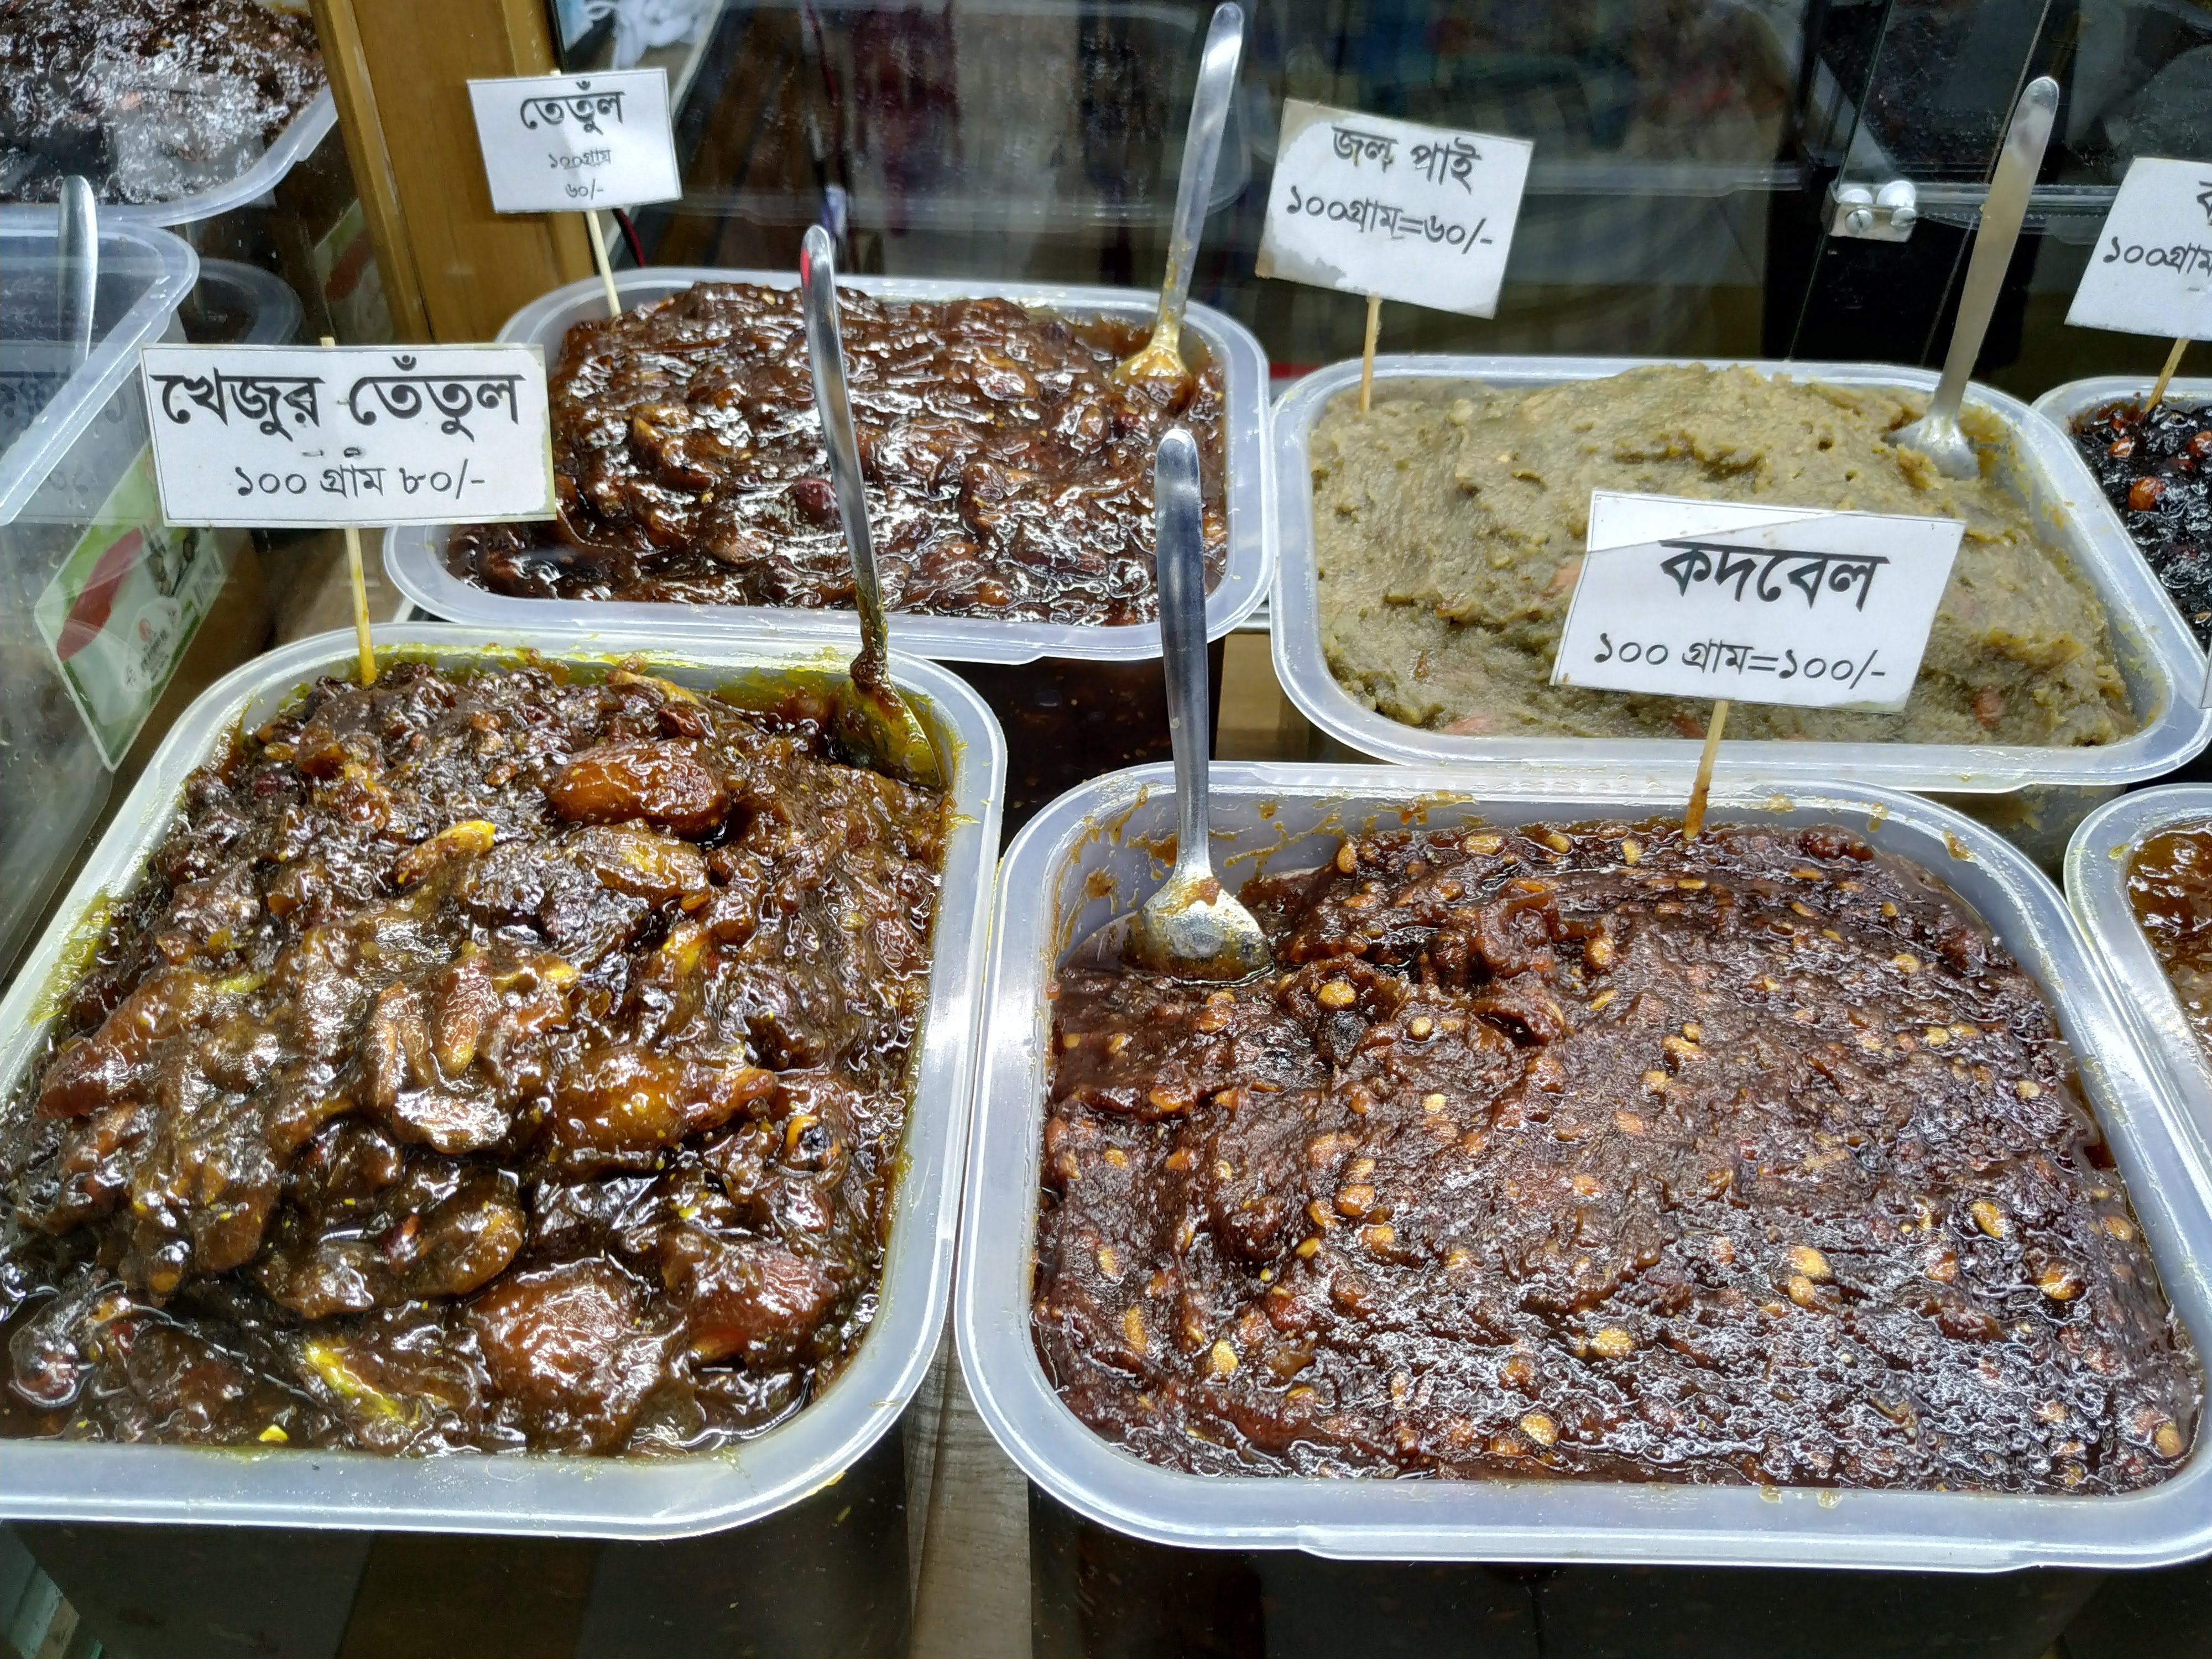 Top left: Tamarind pickle, Top right: Mashed Olive Pickle, Bottom right: Wood apple pickle